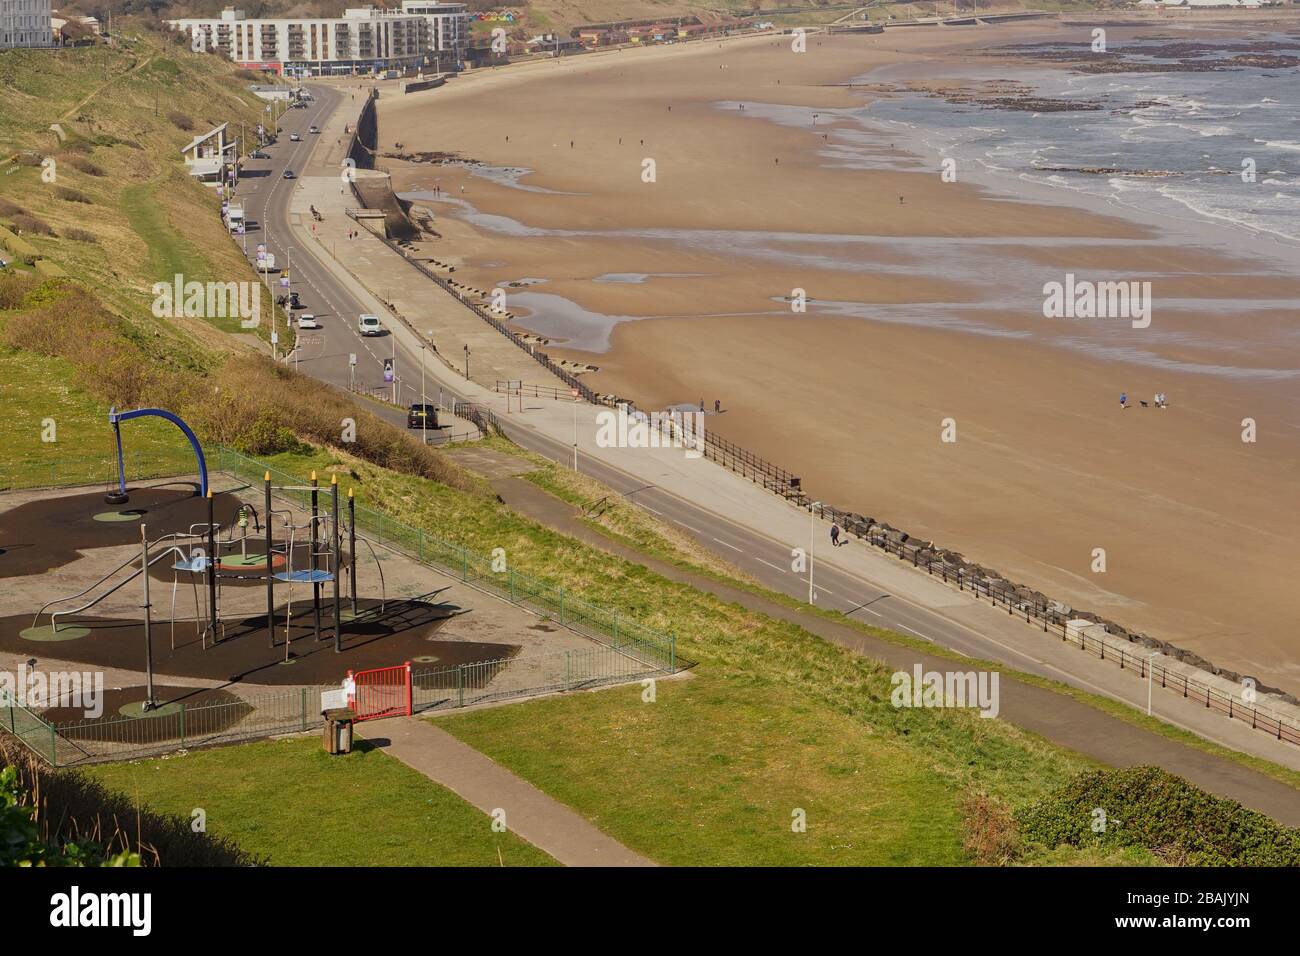 An empty playground and beach due to Coronavirus government lock down restrictions Stock Photo